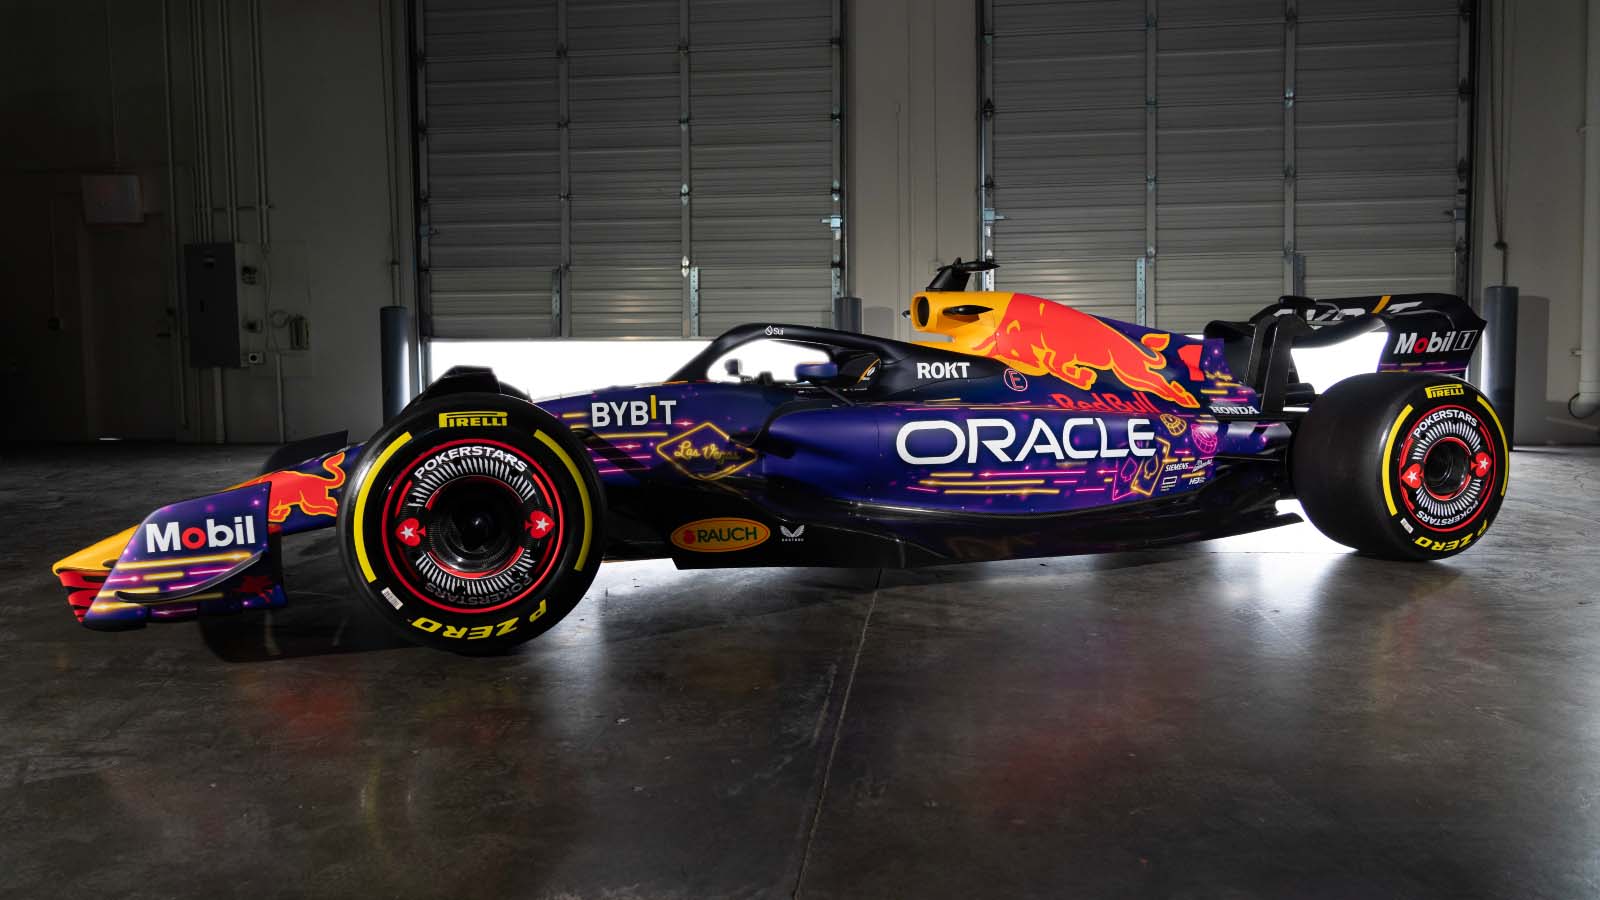 A full view of the Red Bull Las Vegas livery.